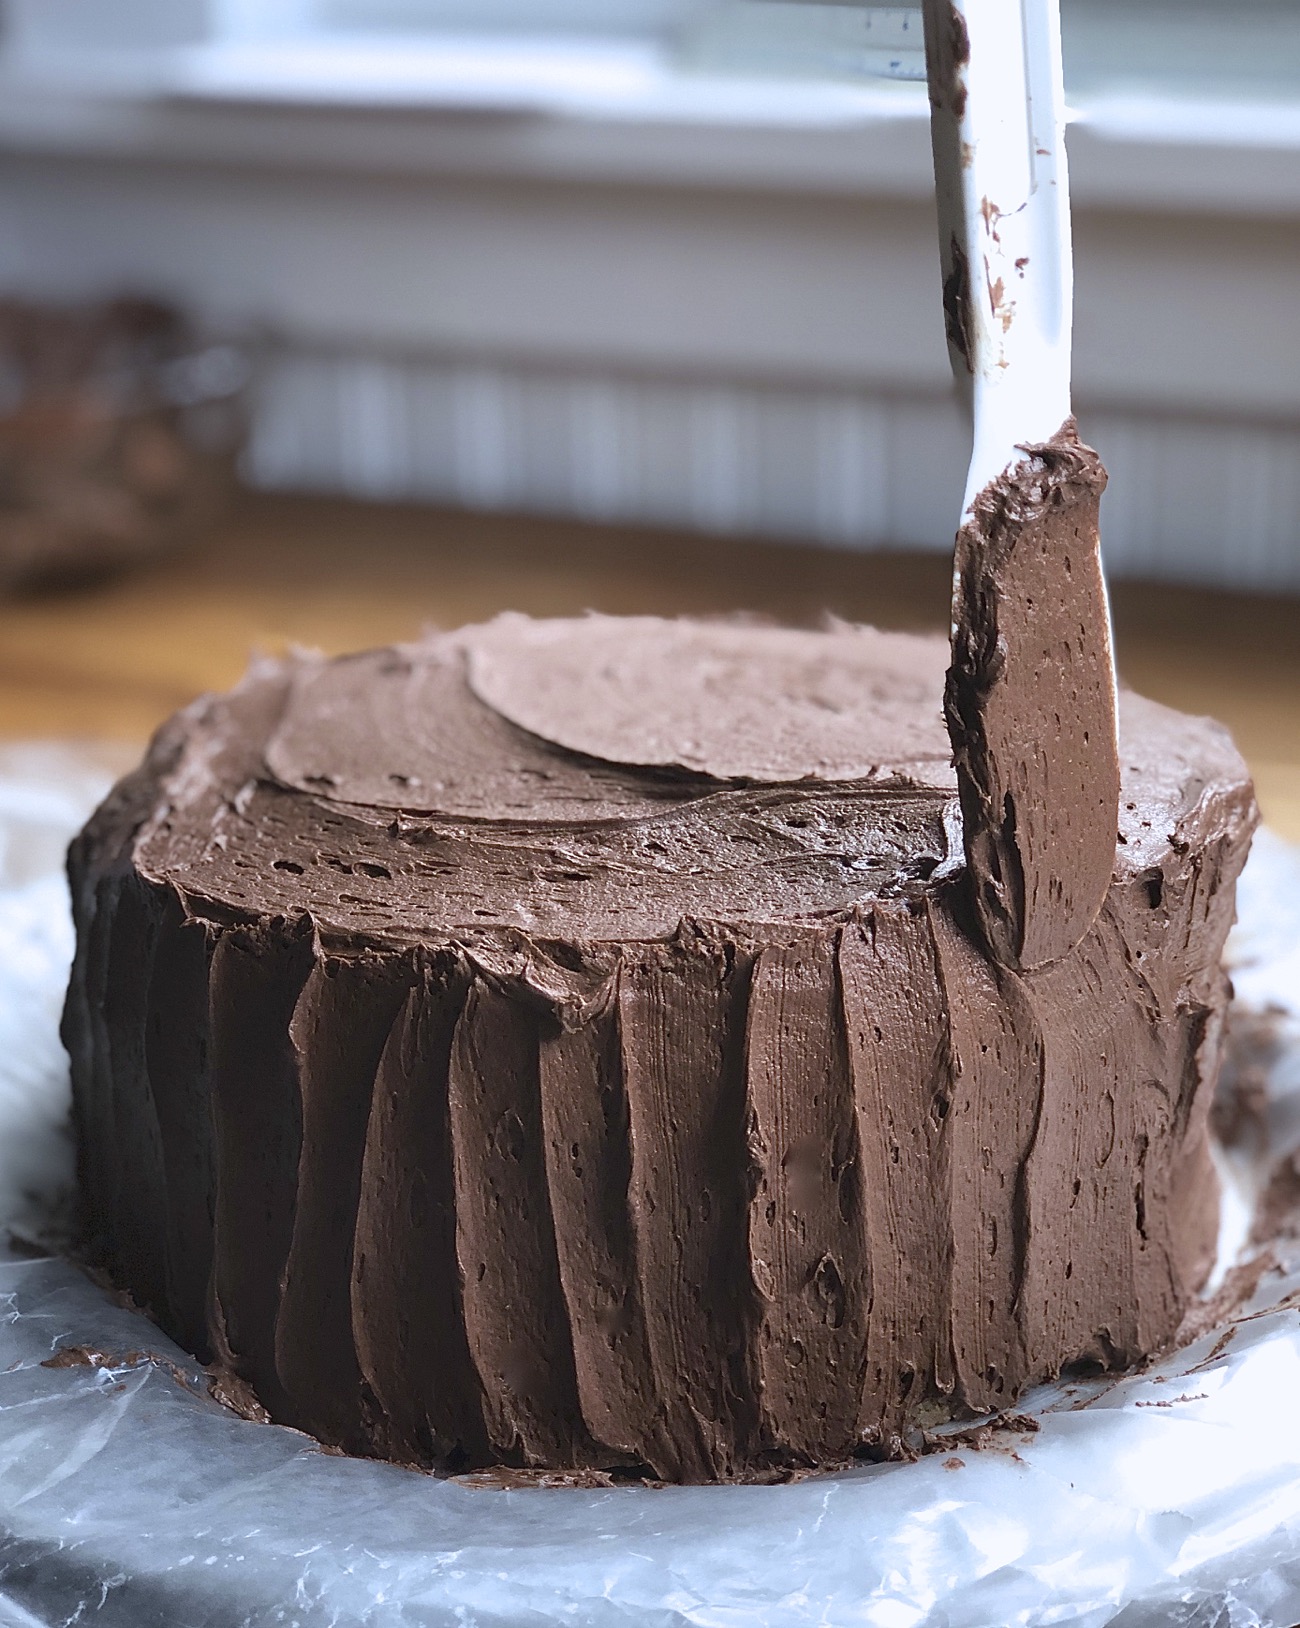 Using a nylon spatula to make vertical scallops in a chocolate-frosted double-layer yellow cake.